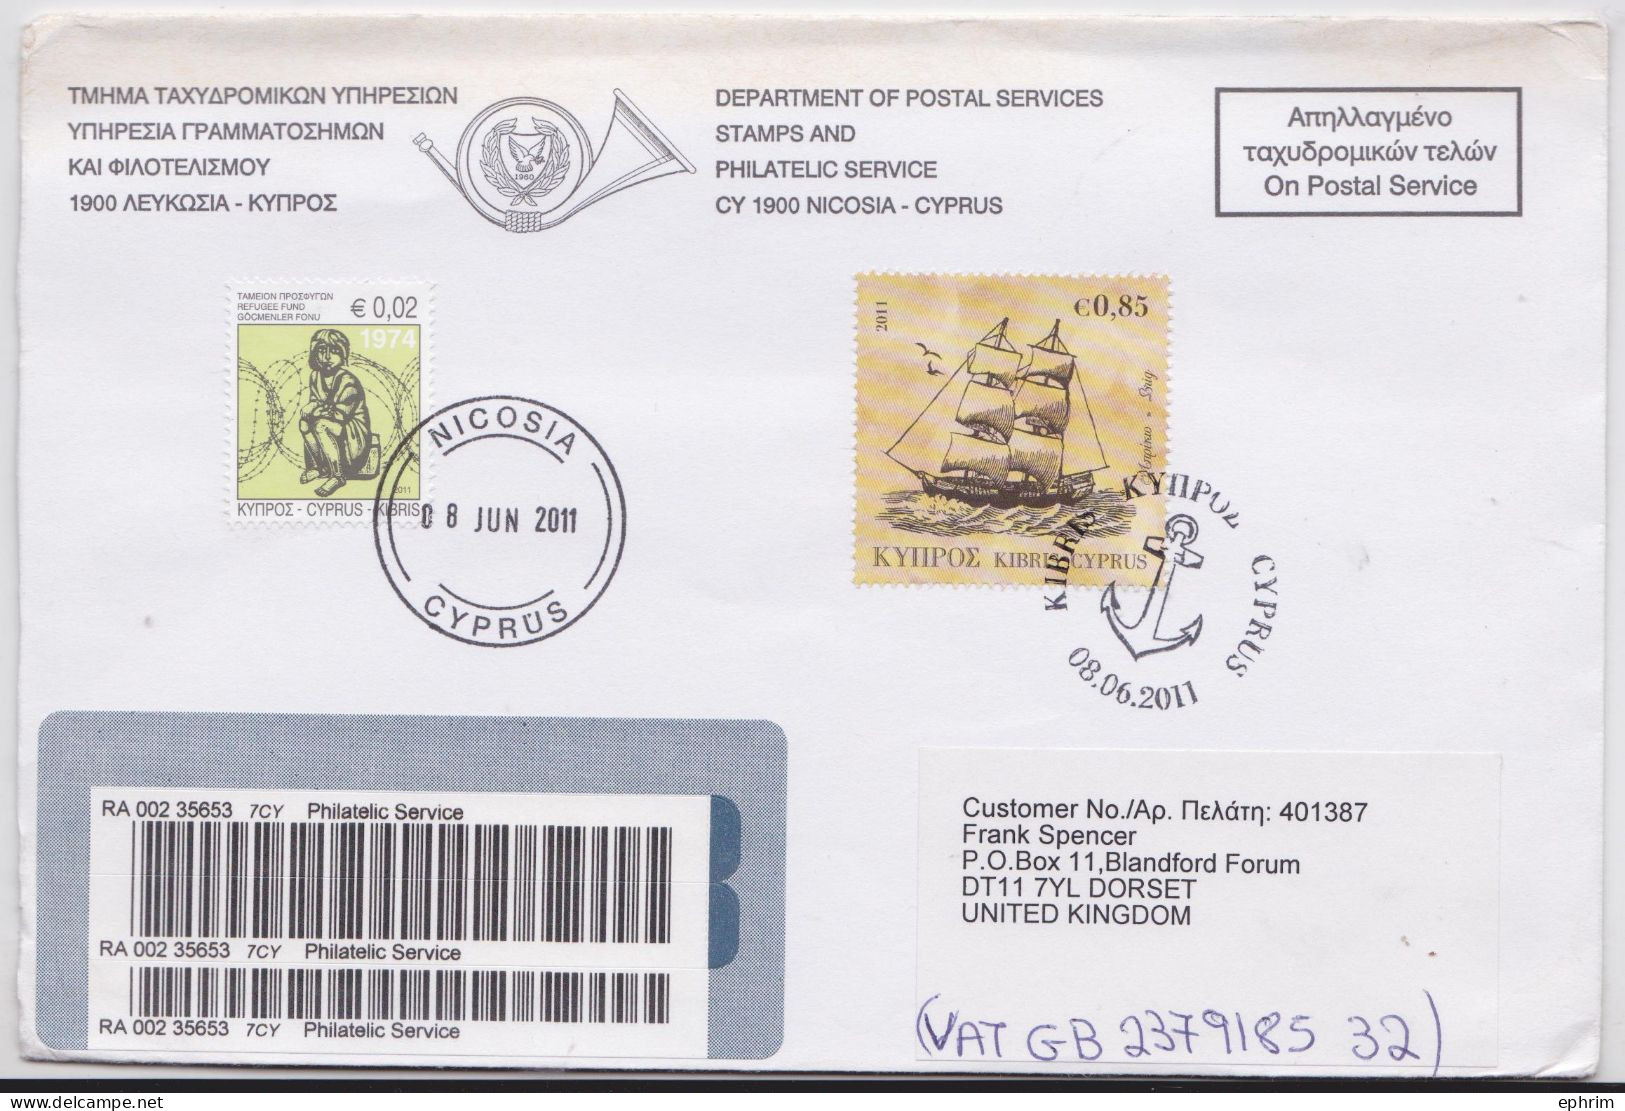 Chypre Cyprus Nicosia Lettre Timbre Voilier Sailing Ship Stamp Registered Air Mail Cover 2011 - Covers & Documents